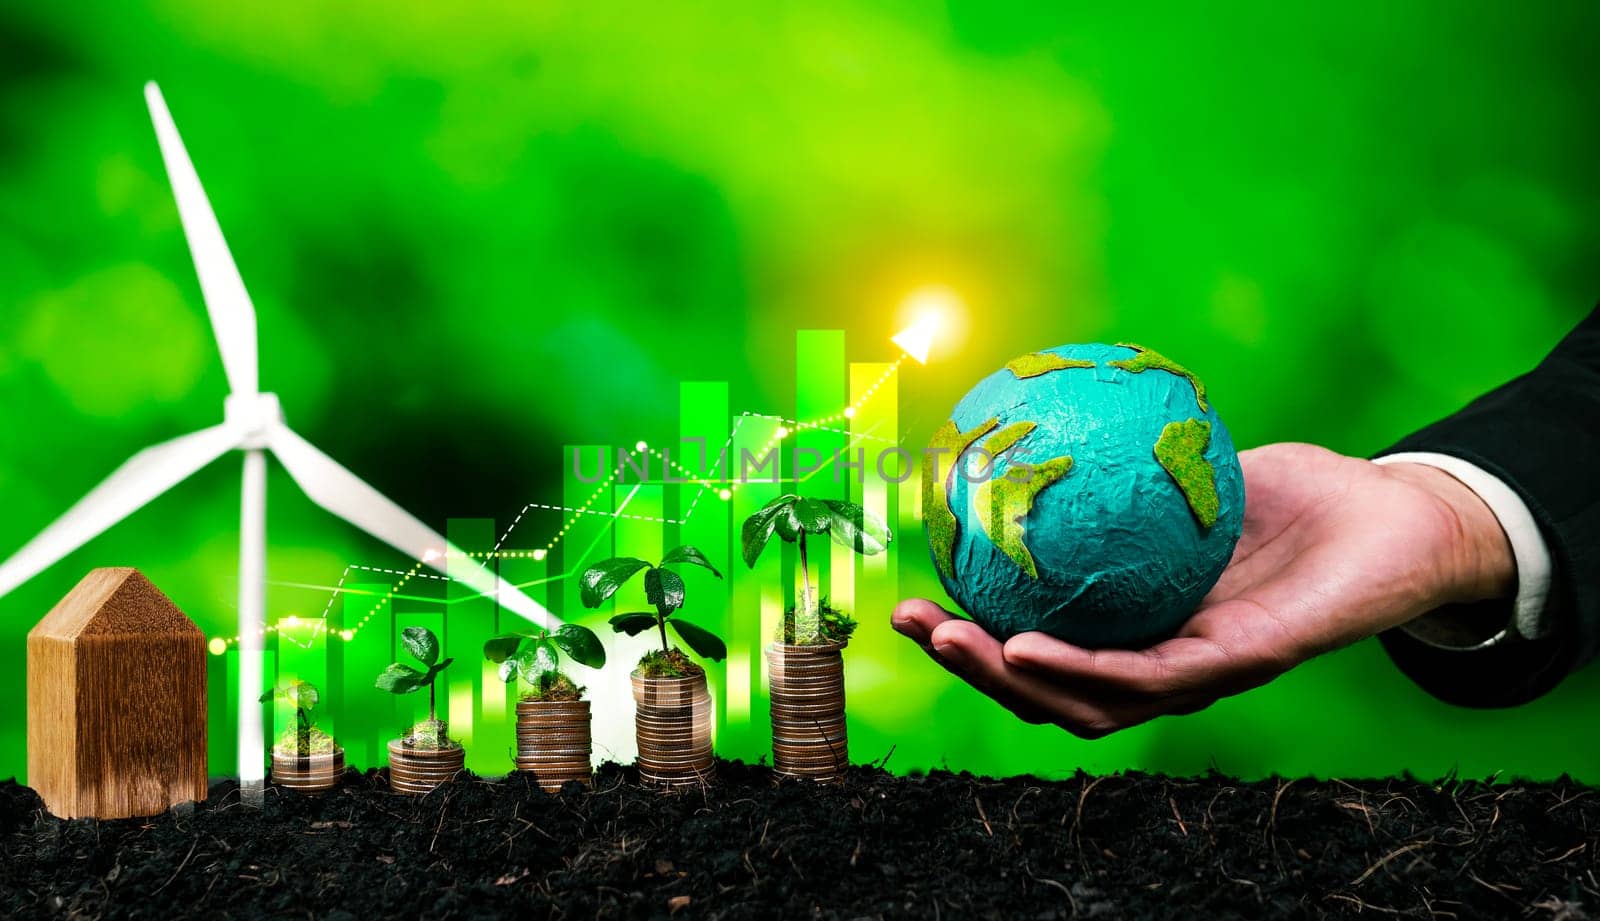 Growing coin or money stack with ESG businessman hold Earth globe symbolize eco investment with sustainable growth potential lead to profitable financial return and environmental protection. Reliance